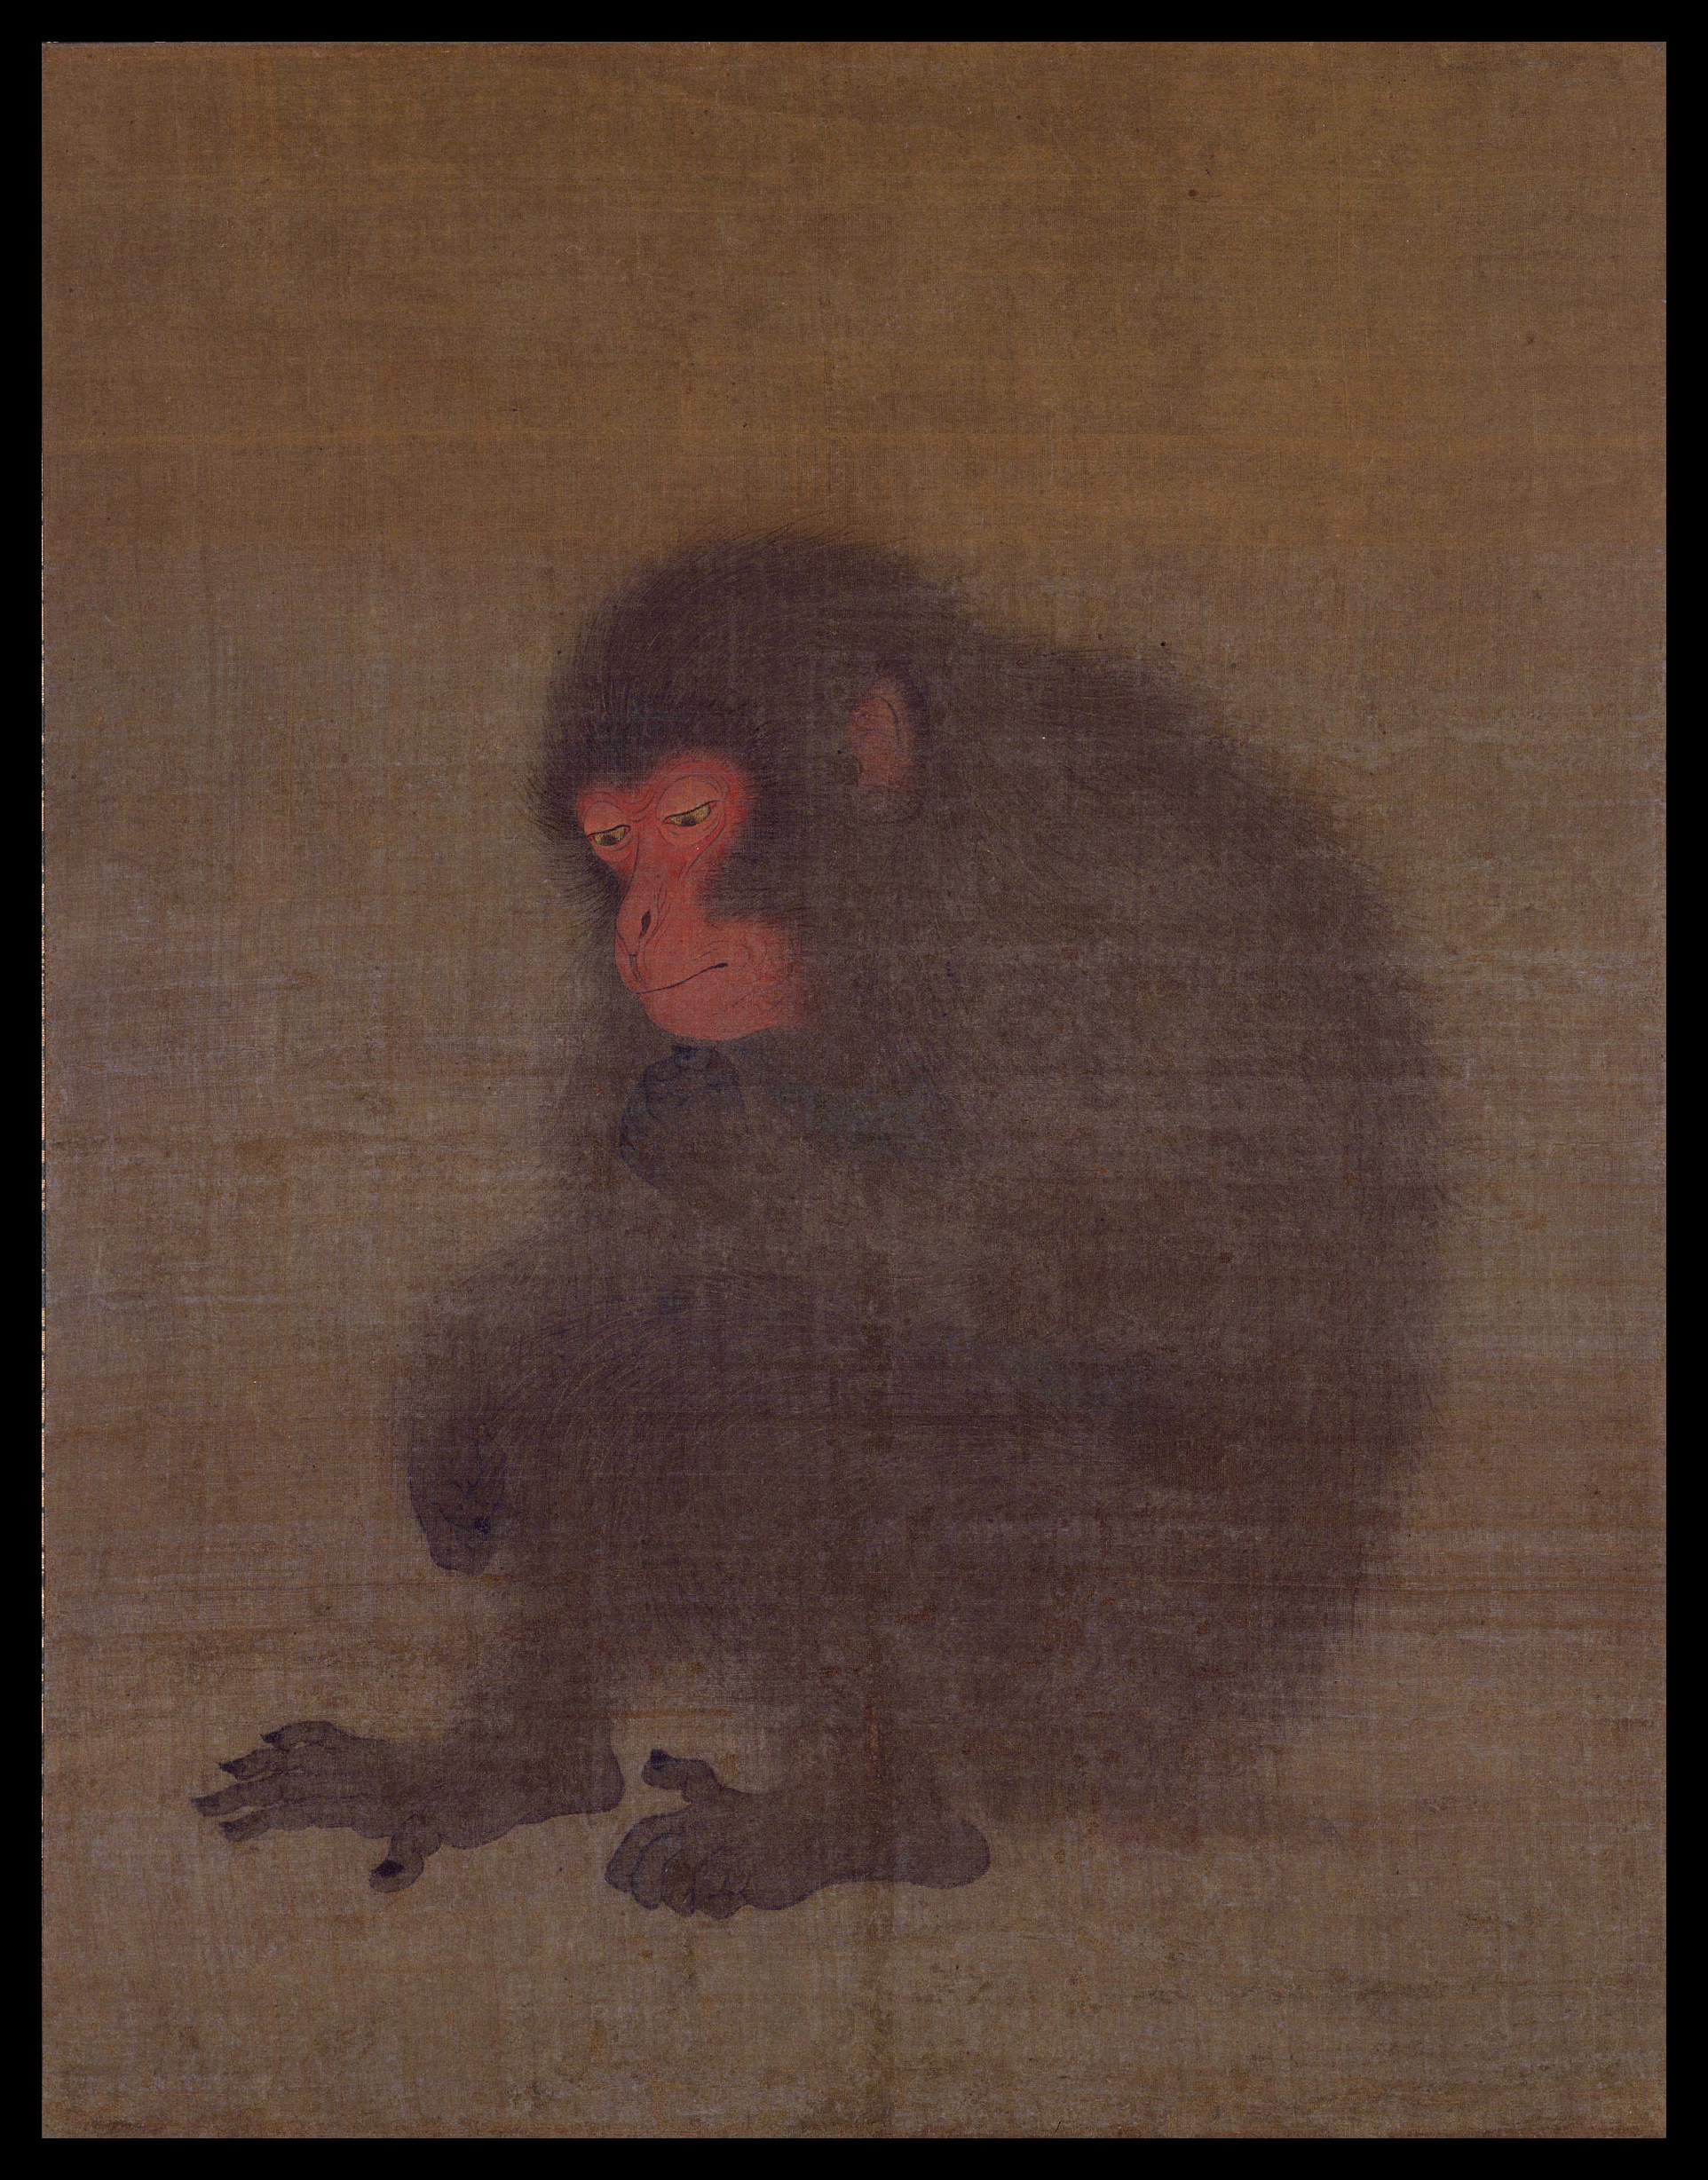 Um Macaco by Mao Song - 2nd quarter 12th century 